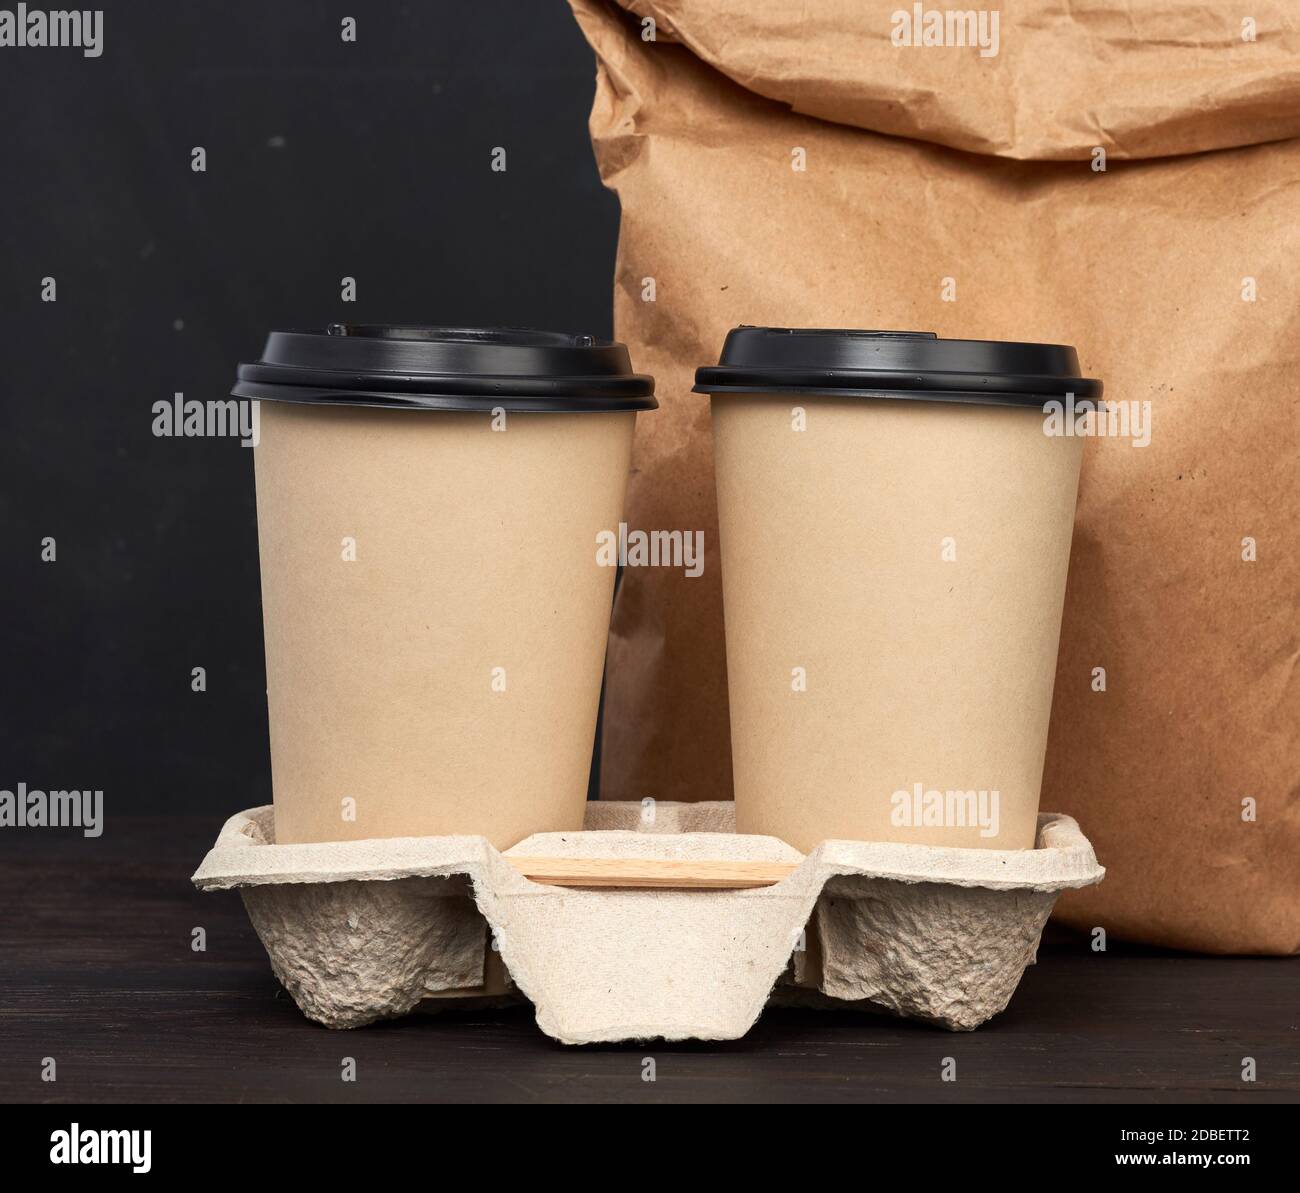 https://c8.alamy.com/comp/2DBETT2/brown-paper-disposable-cups-with-a-plastic-lid-stand-in-the-tray-on-a-wooden-table-black-background-takeaway-containers-2DBETT2.jpg